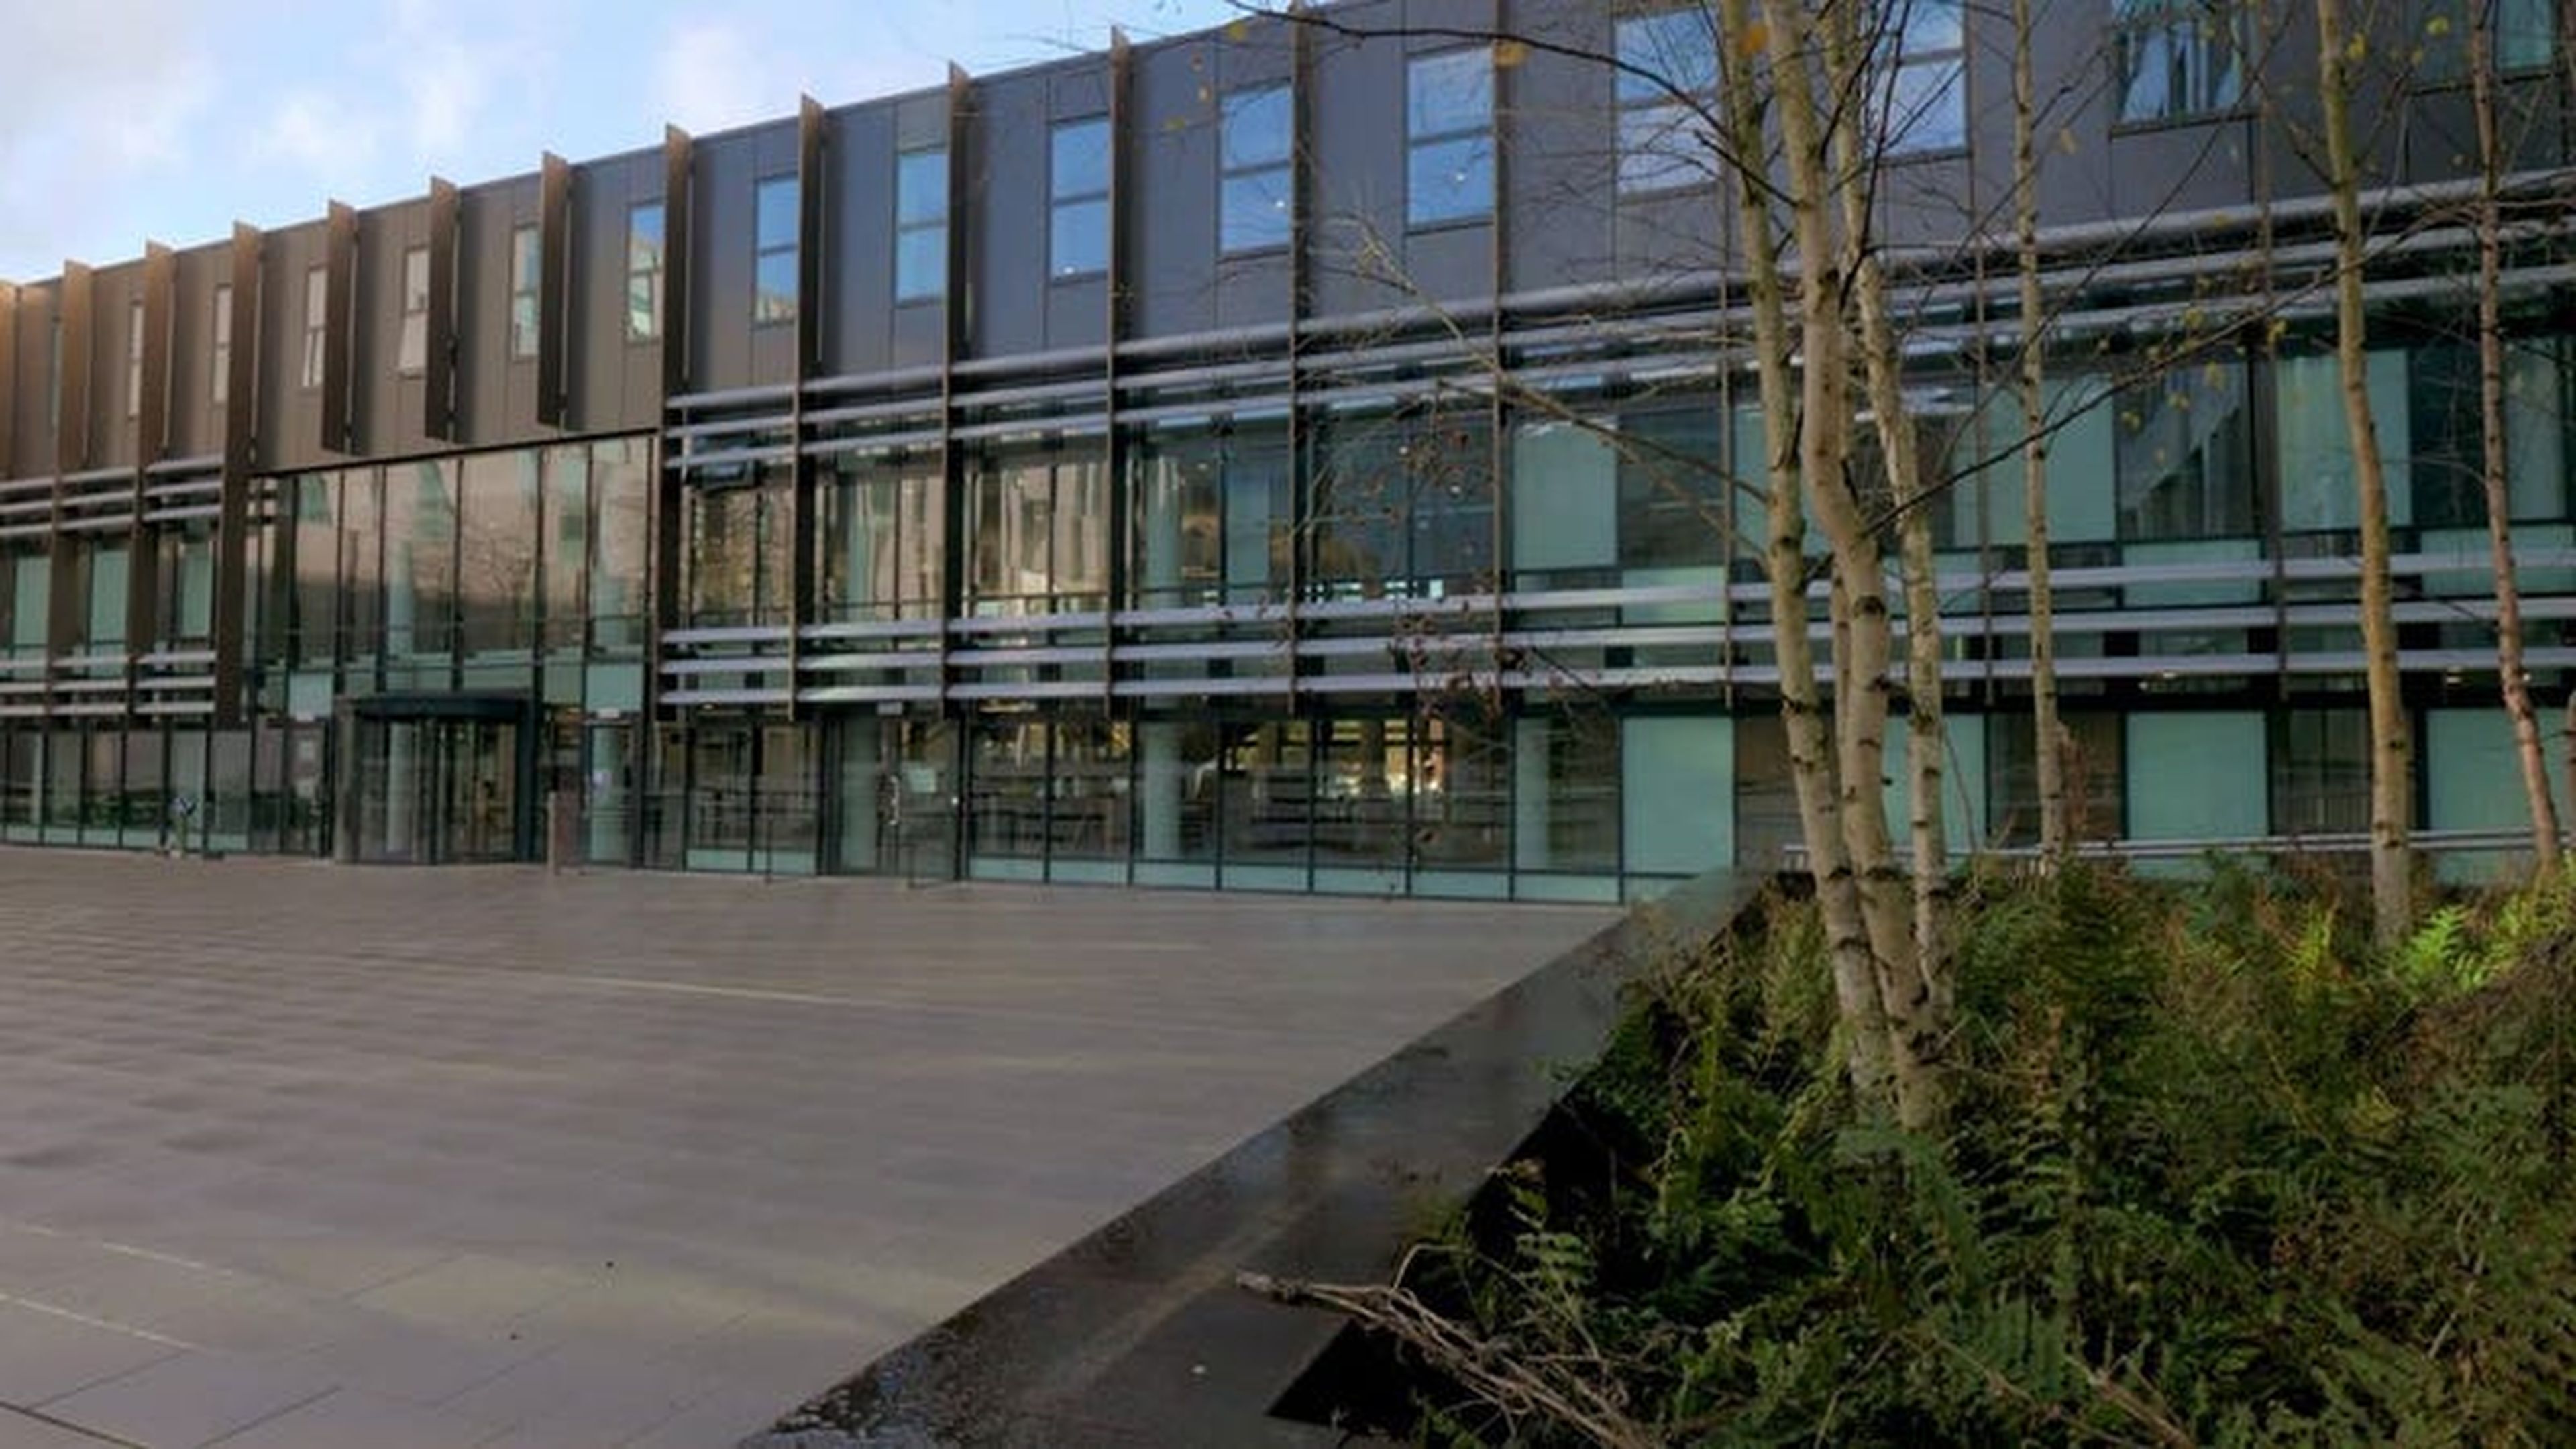 15. Oxford Brookes Business School